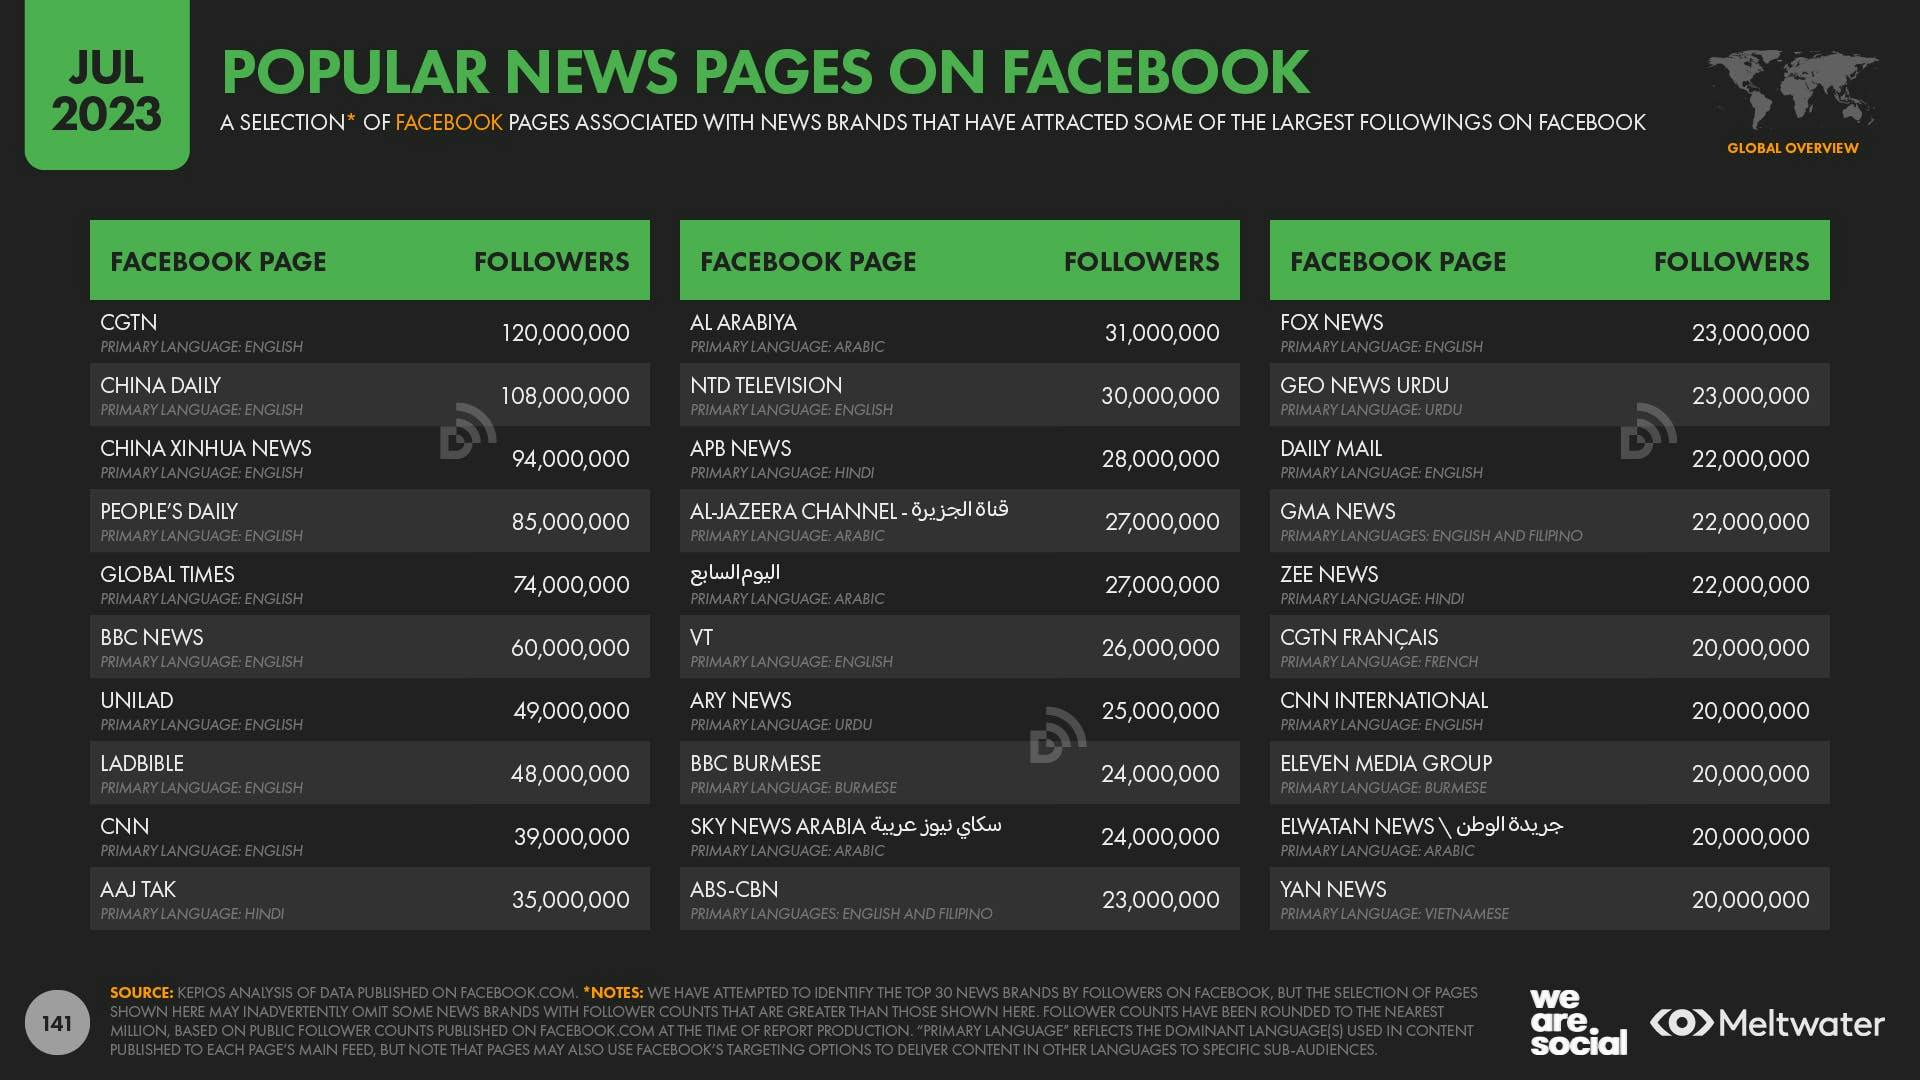 A list of the most popular news pages on Facebook ranked by number of followers.